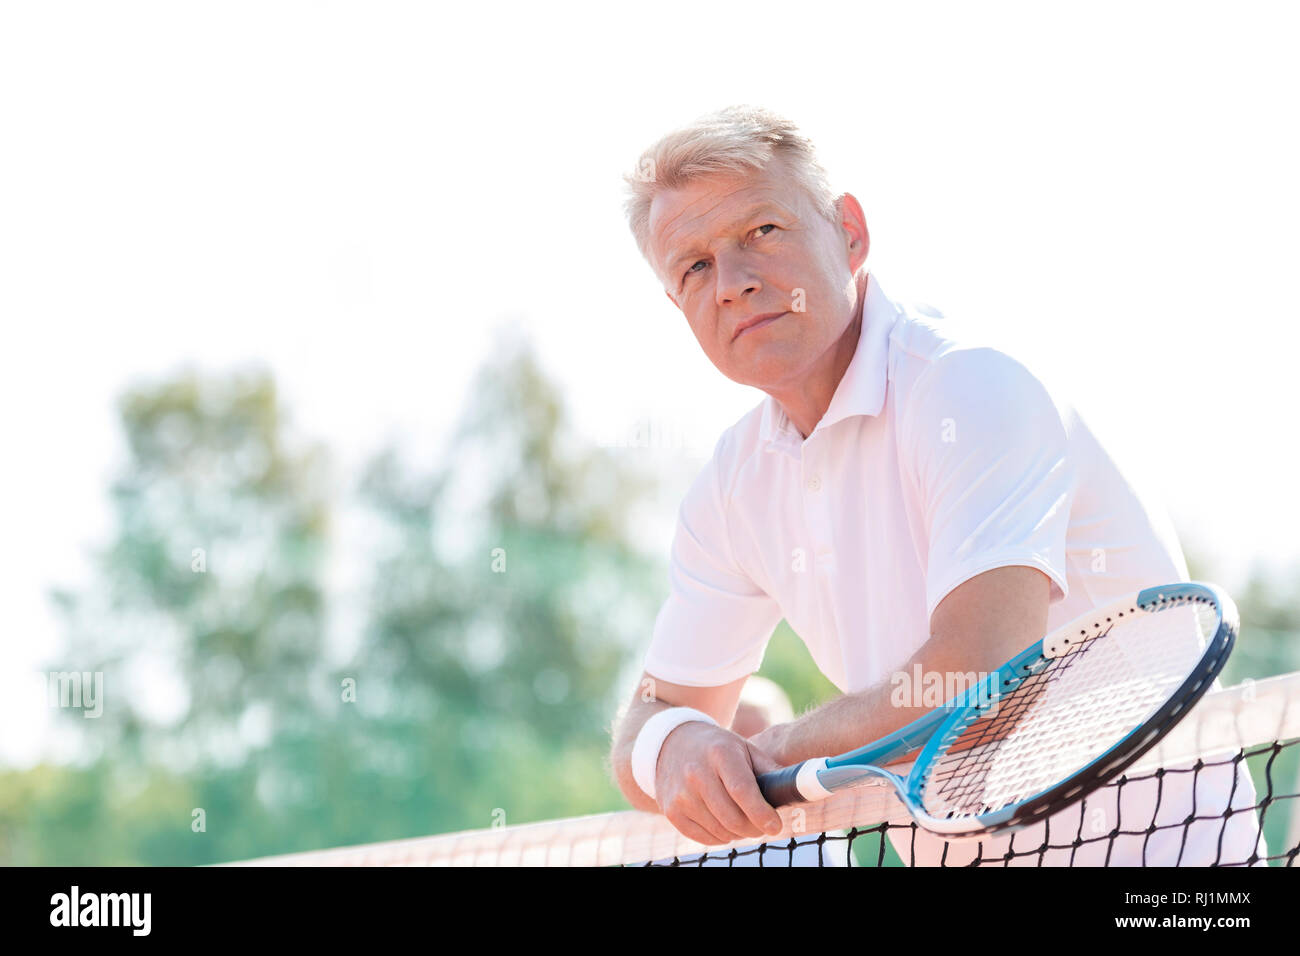 Thoughtful mature man holding tennis racket while leaning on net against clear sky Stock Photo